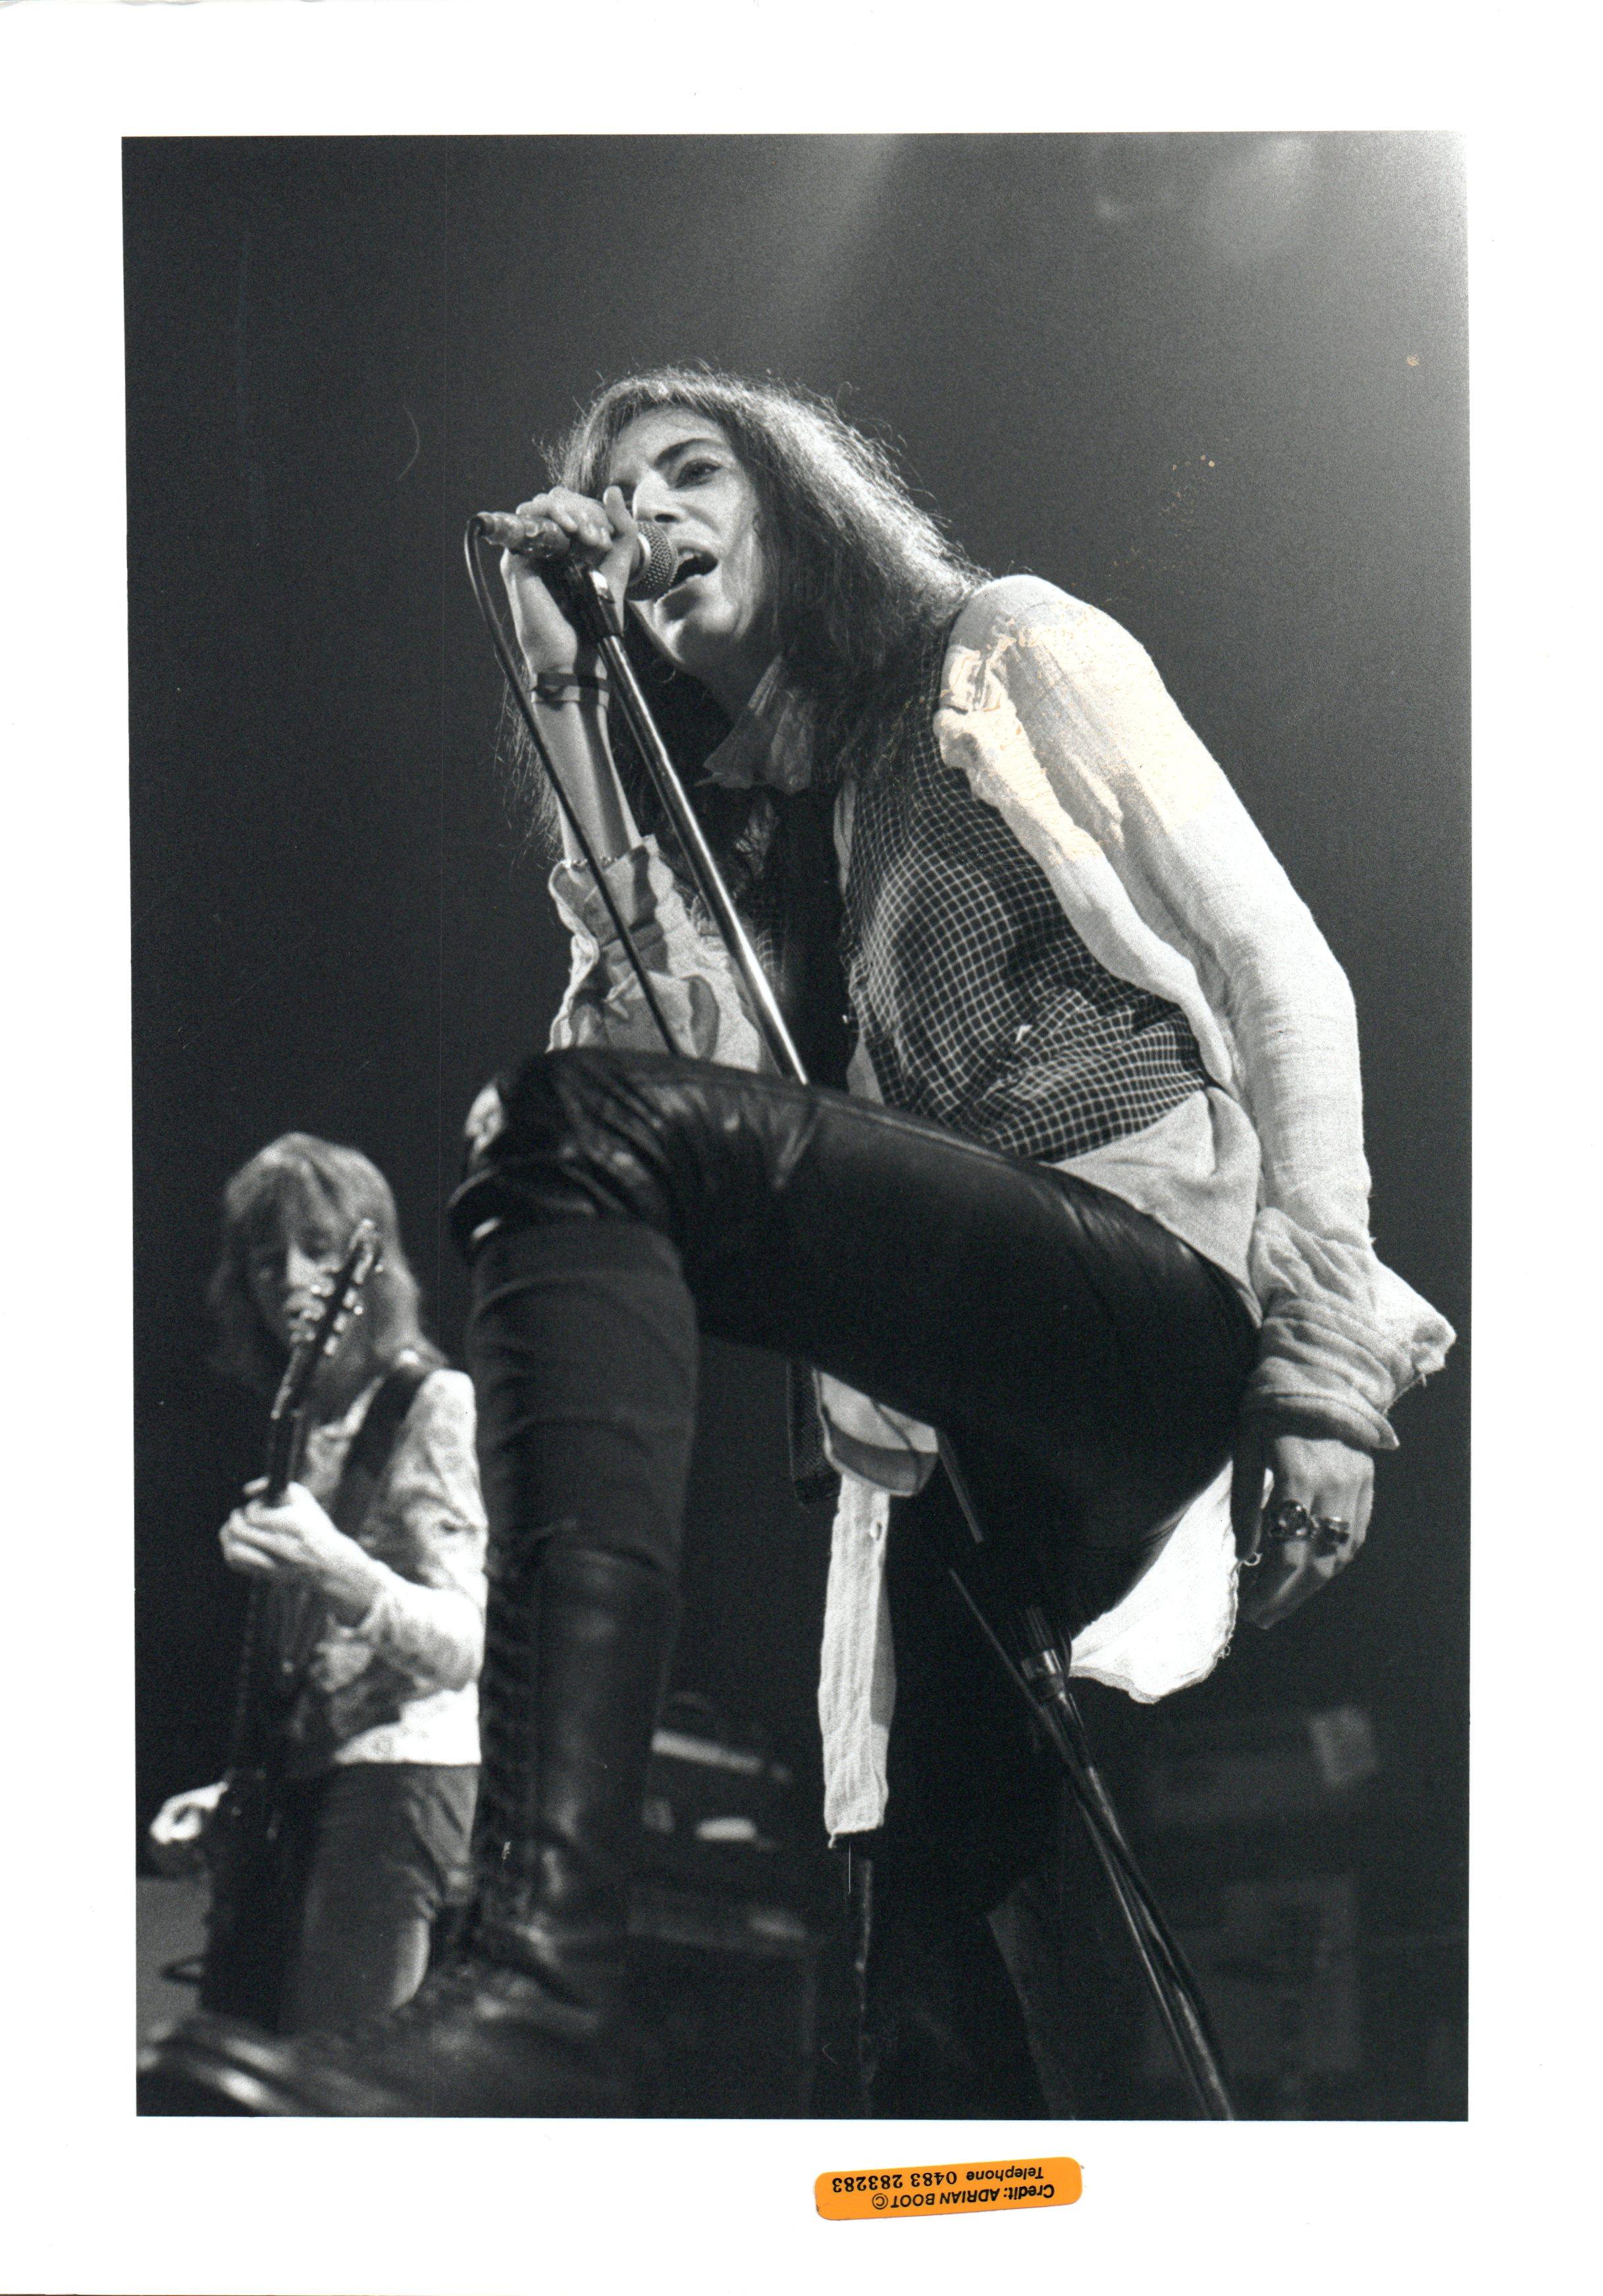 Unknown Black and White Photograph - Patti Smith on Stage Vintage Original Photograph